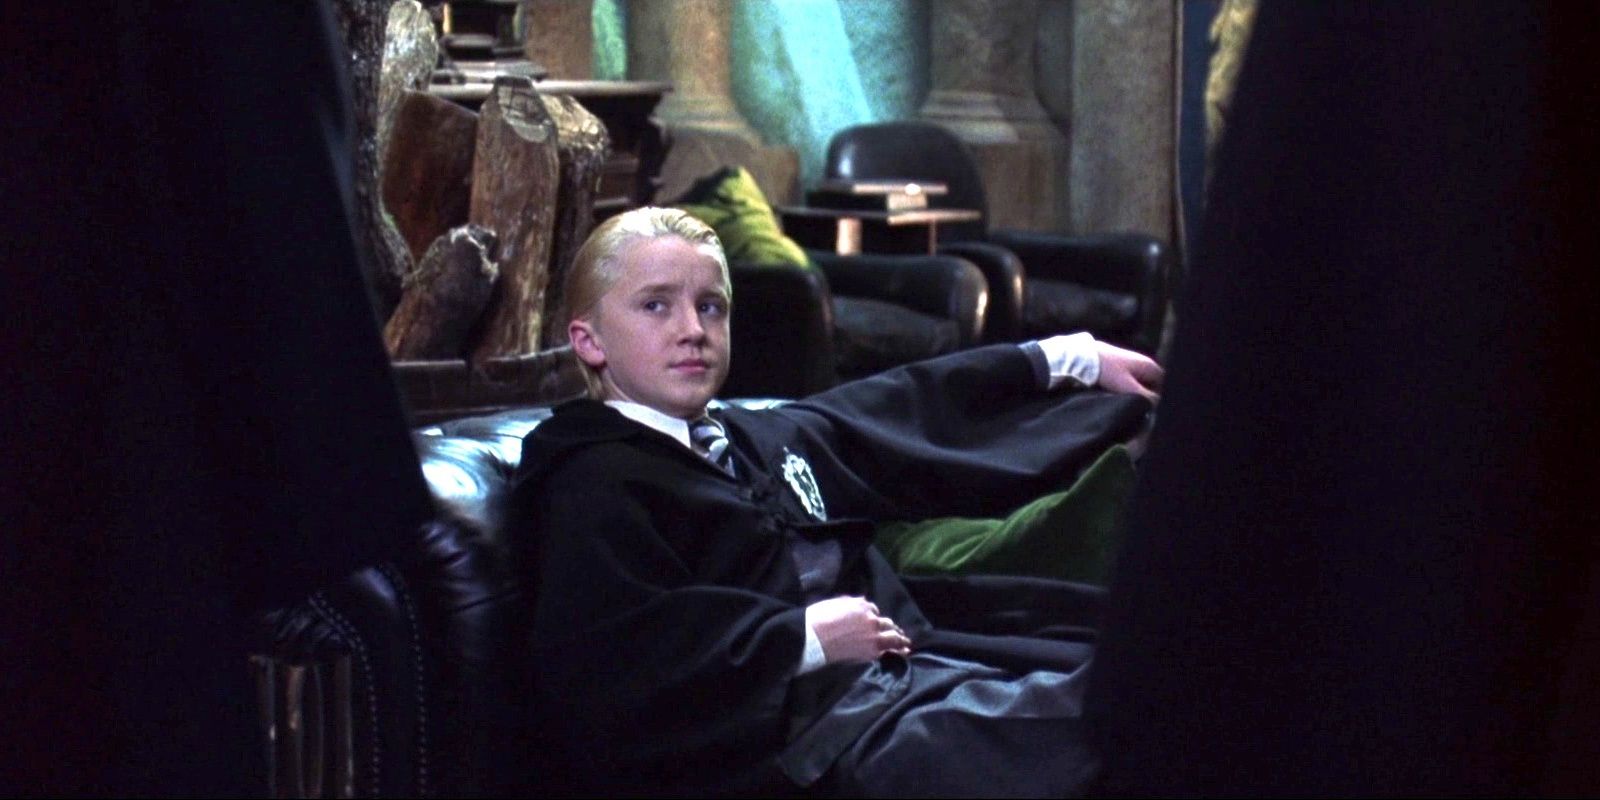 Draco Malfoy lying on a couch in Harry Potter and the Chamber of Secrets